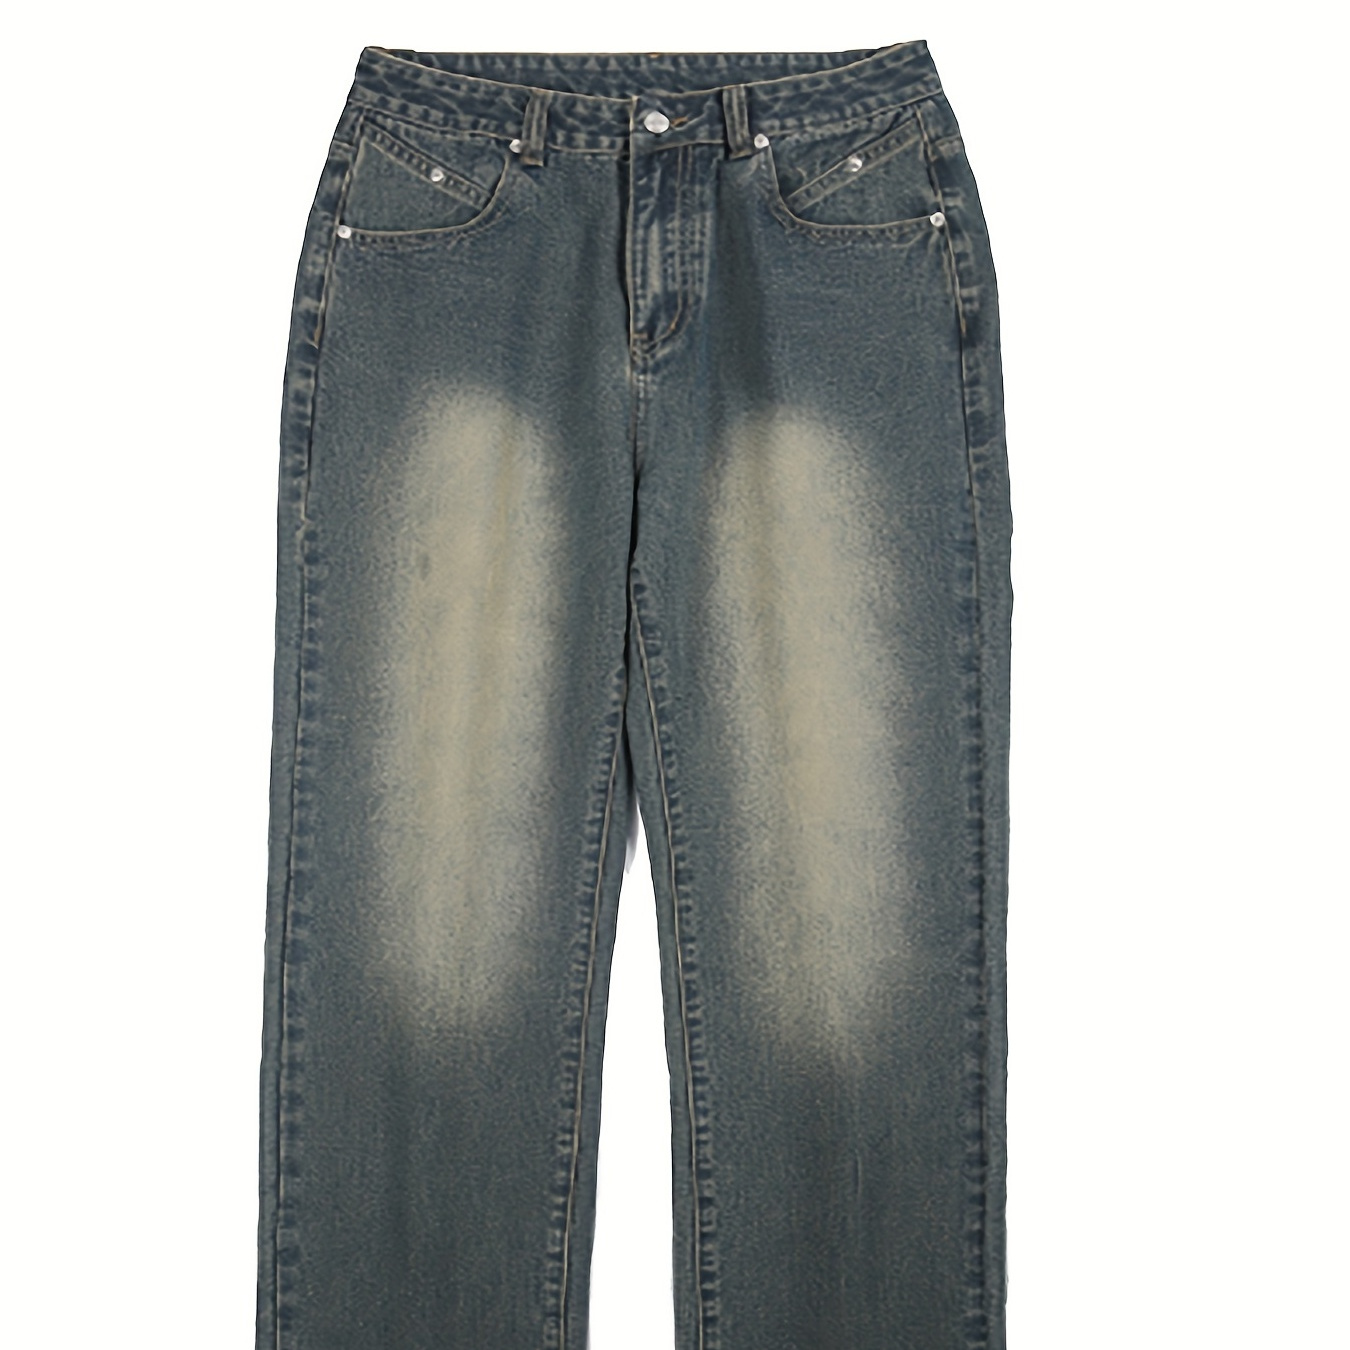 

Loose Fit Vintage Style Distressed Jeans, Men's Casual Straight Leg Denim Pants For Spring Summer